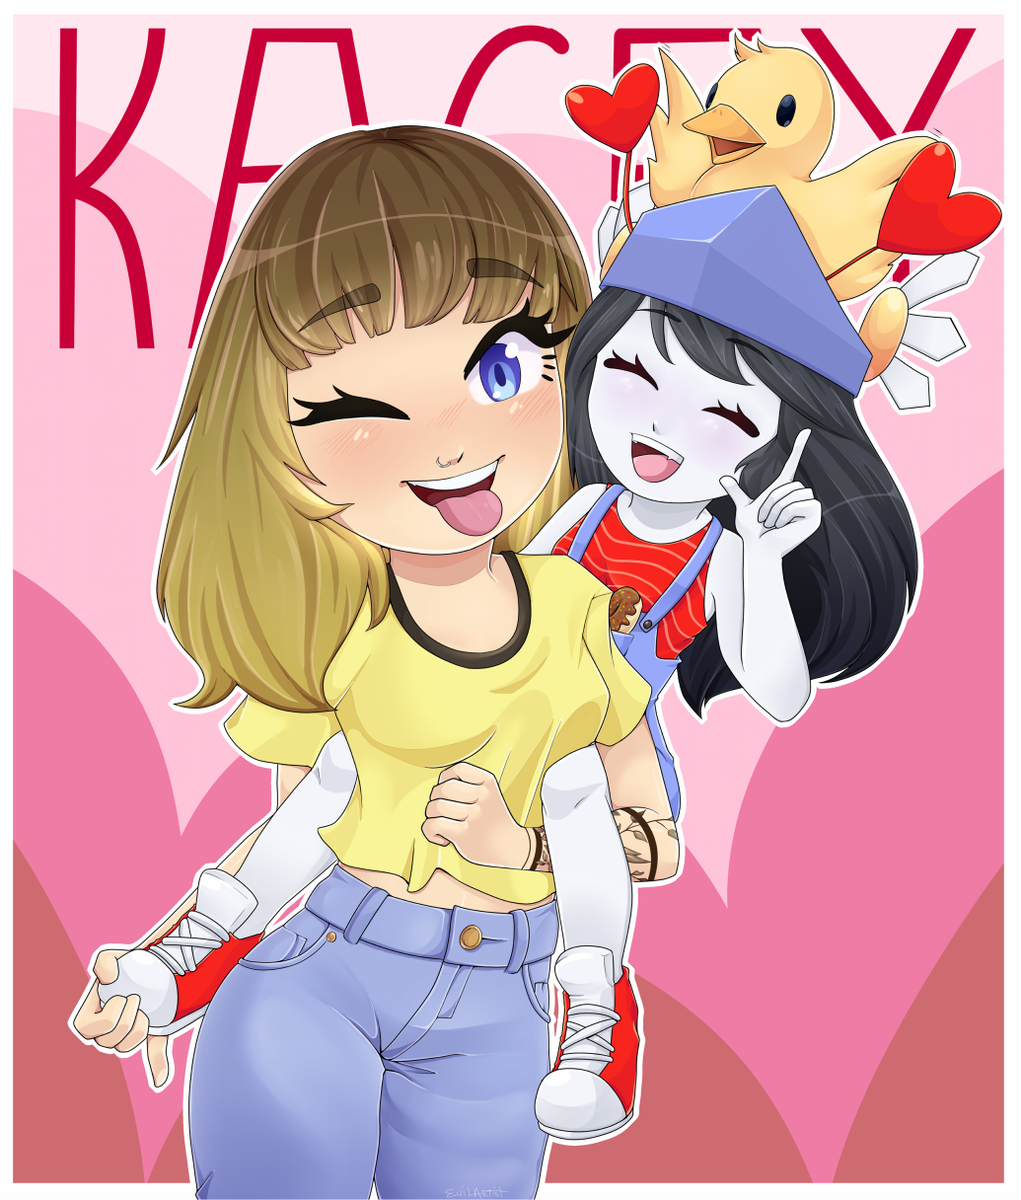 Evilartist On Twitter Commission For Kaceywilleatchu Of Herself And Her Roblox Character Thanks For Buying 3 High Quality Https T Co J5dgxg2yzq Https T Co Jn3steokdc - roblox character yellow girl